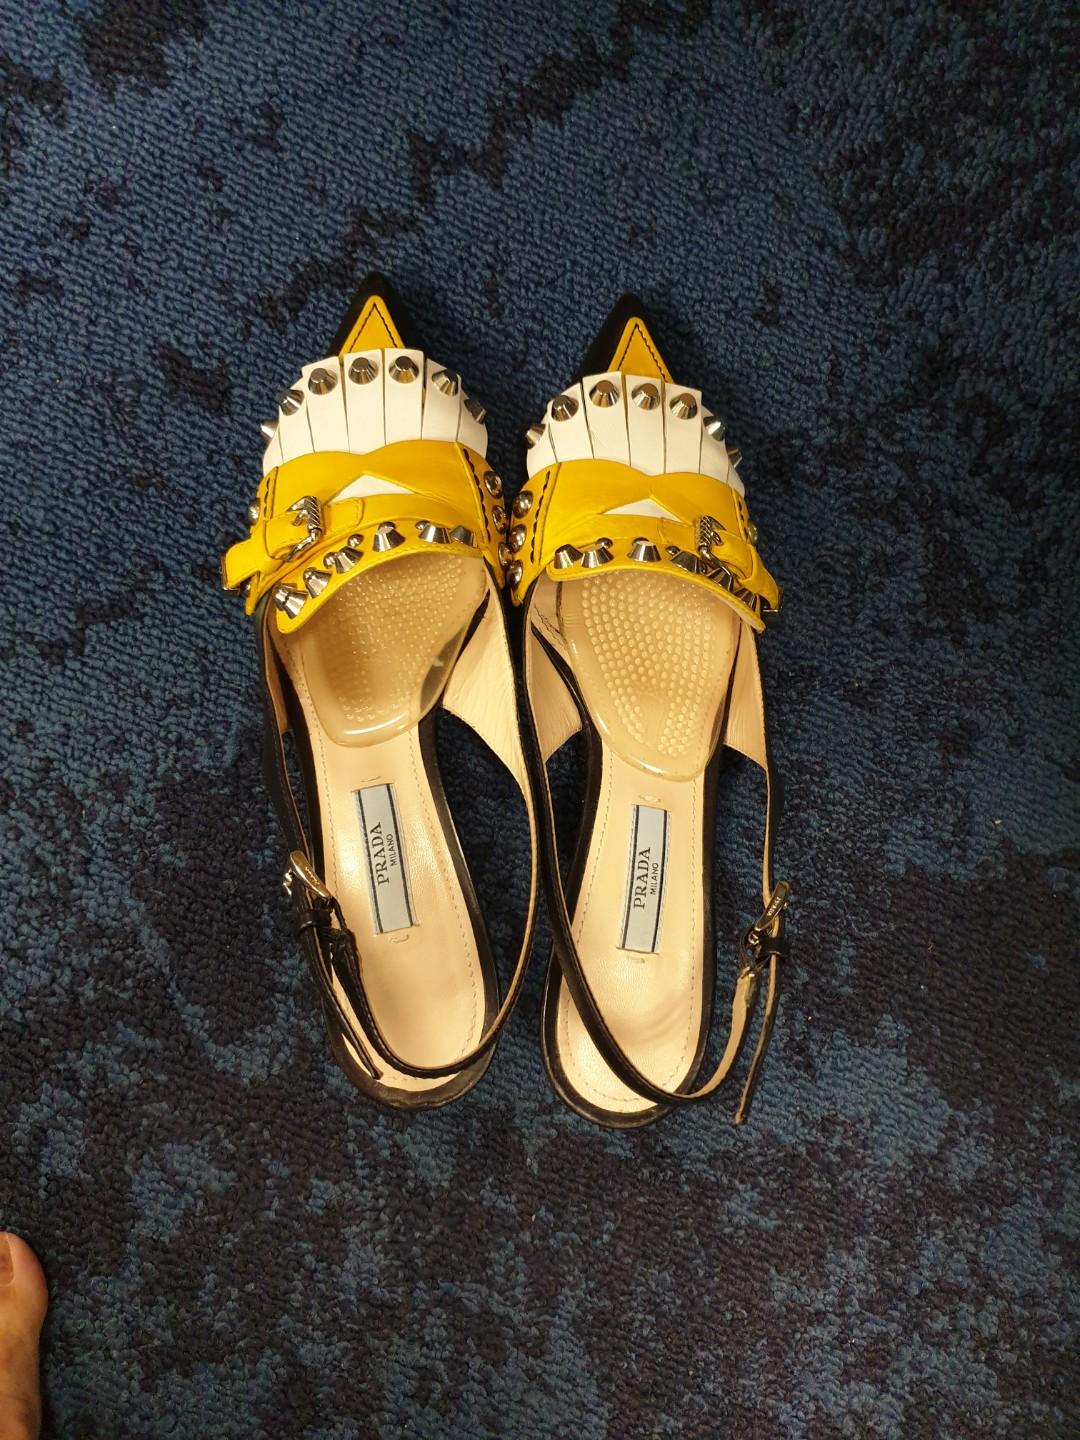 yellow and black pumps